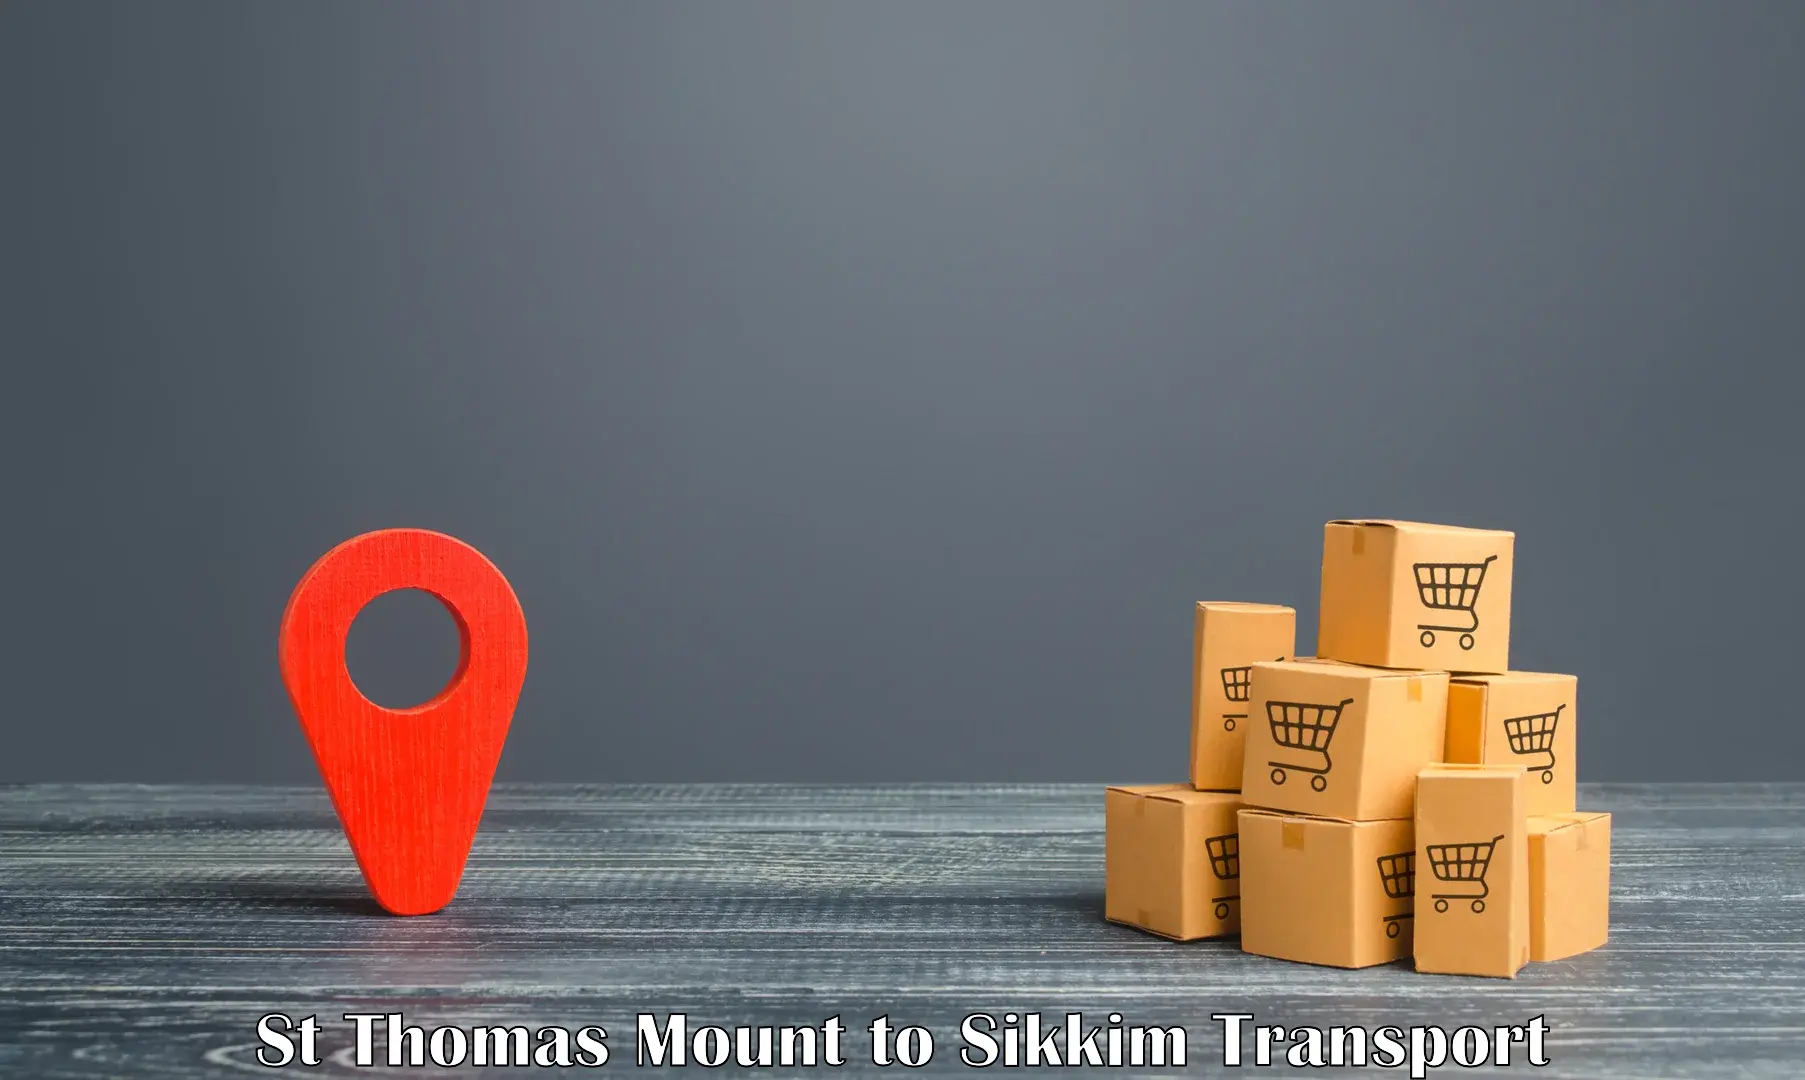 Daily transport service St Thomas Mount to Sikkim